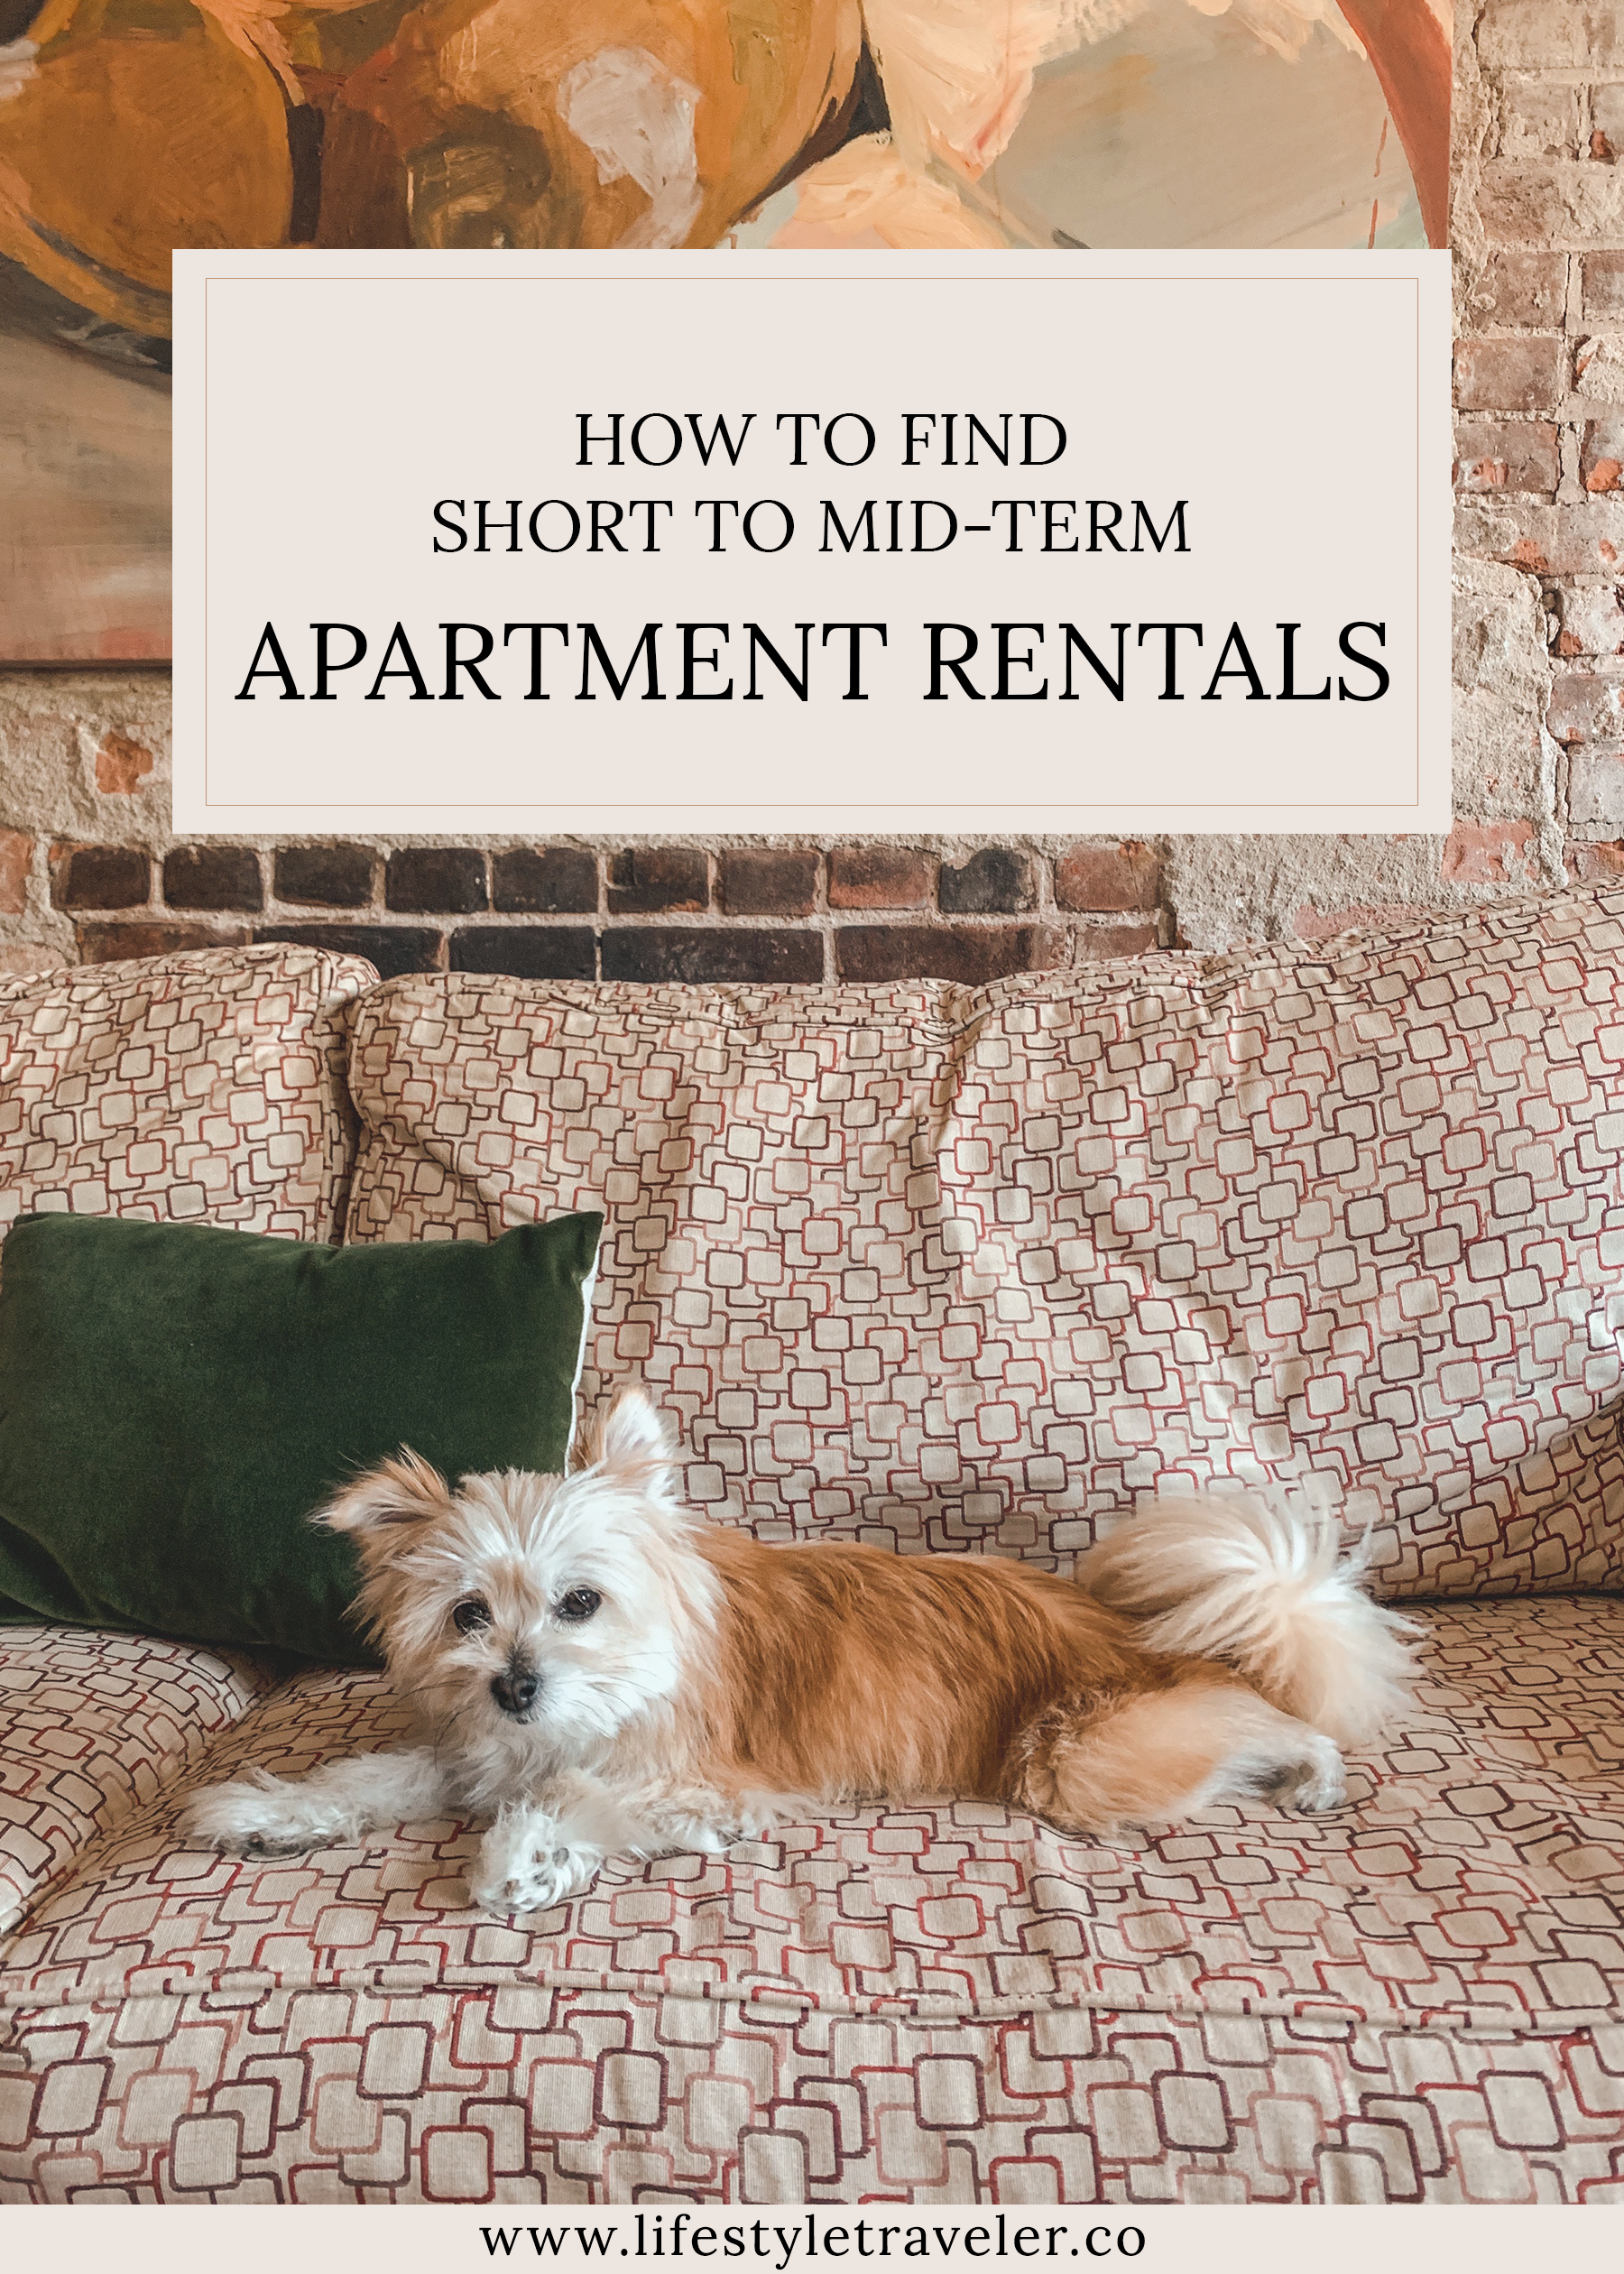 How To Find Short to Mid-Term Apartment Rentals | lifestyletraveler.co | IG: @lifestyletraveler.co